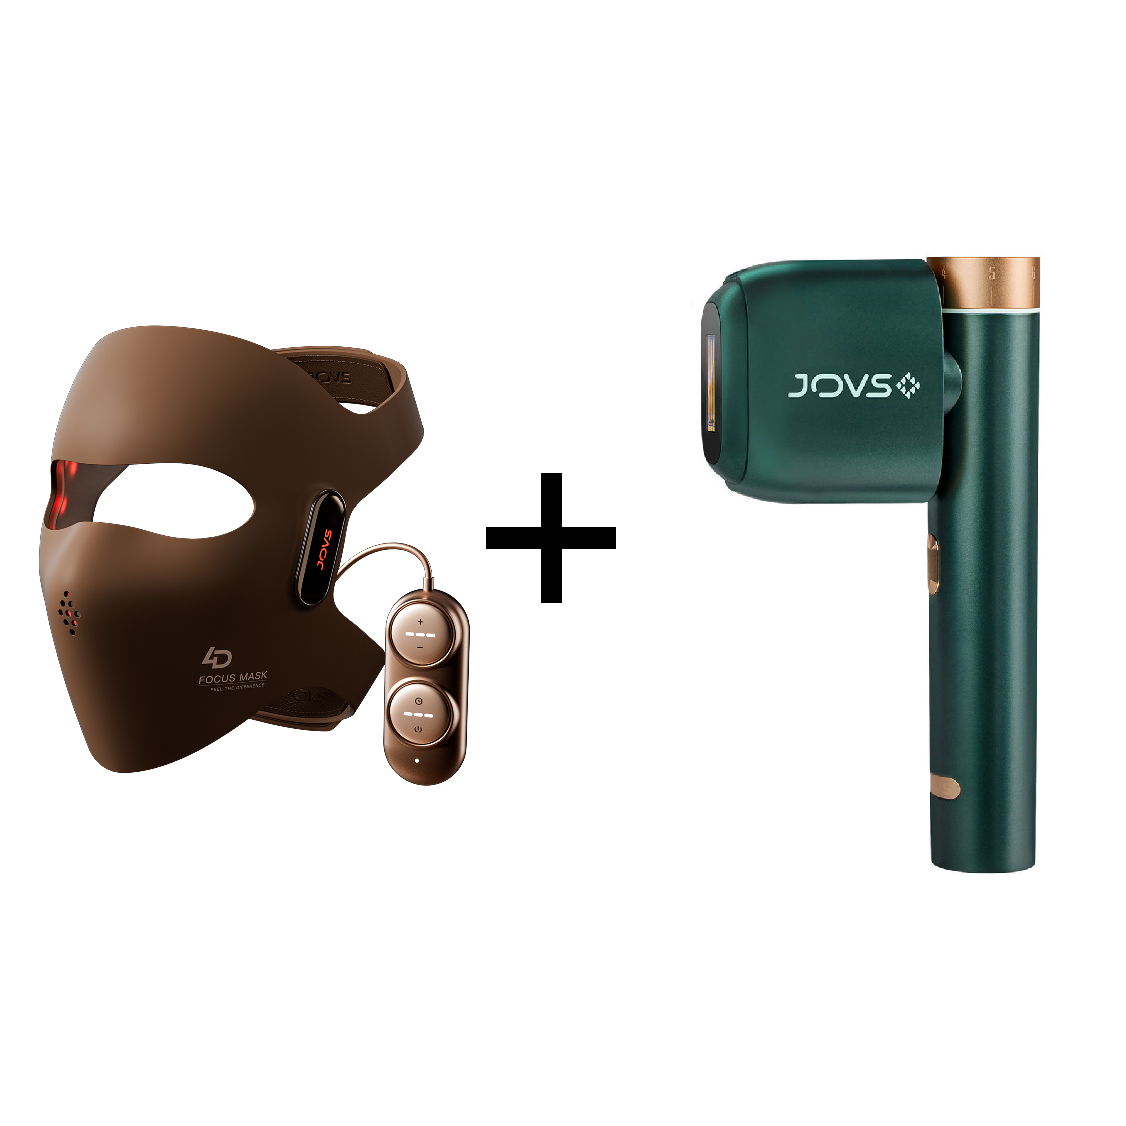 JOVS 4D Laser Light Therapy Mask paired with JOVS Venus Pro Hair Removal Device, providing a comprehensive skincare and hair removal solution.